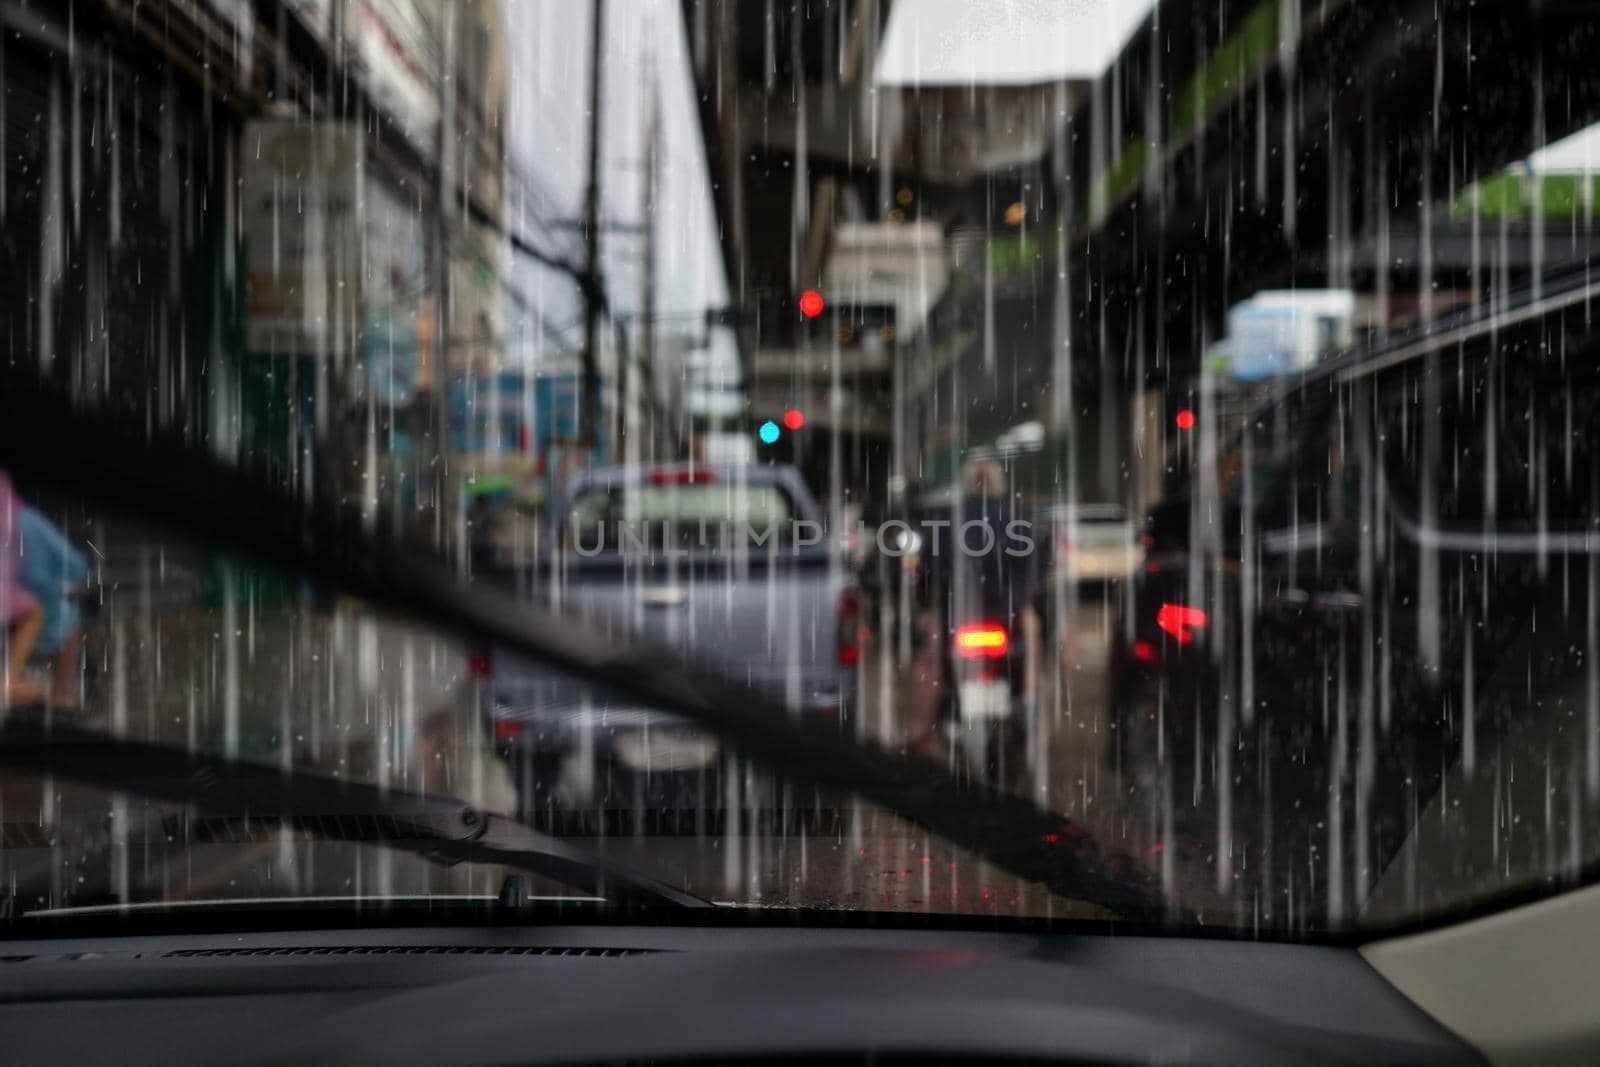 city rain view from wind shield of car in urban weather